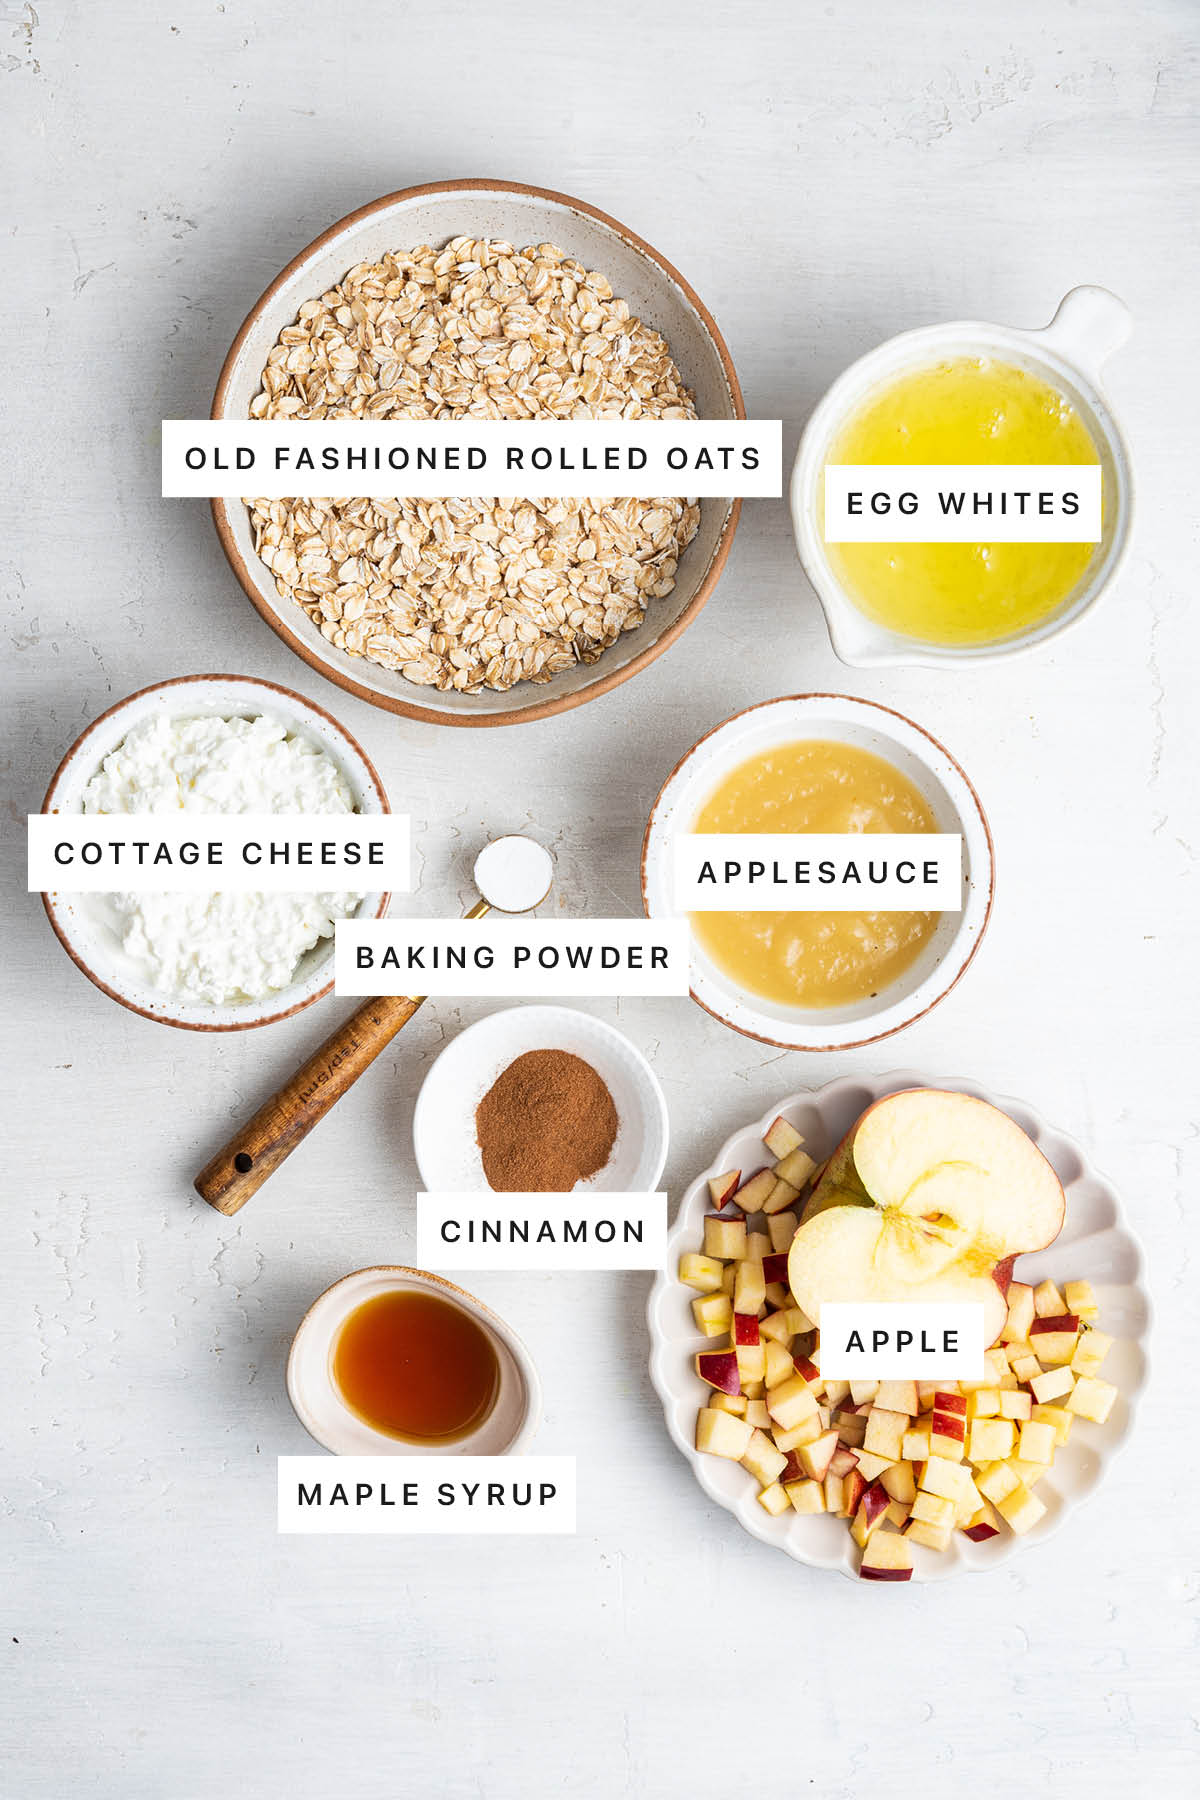 Ingredients measured out to make Healthy Apple Pancakes: oats, egg whites, cottage cheese, applesauce, baking powder, cinnamon, maple syrup and apple.